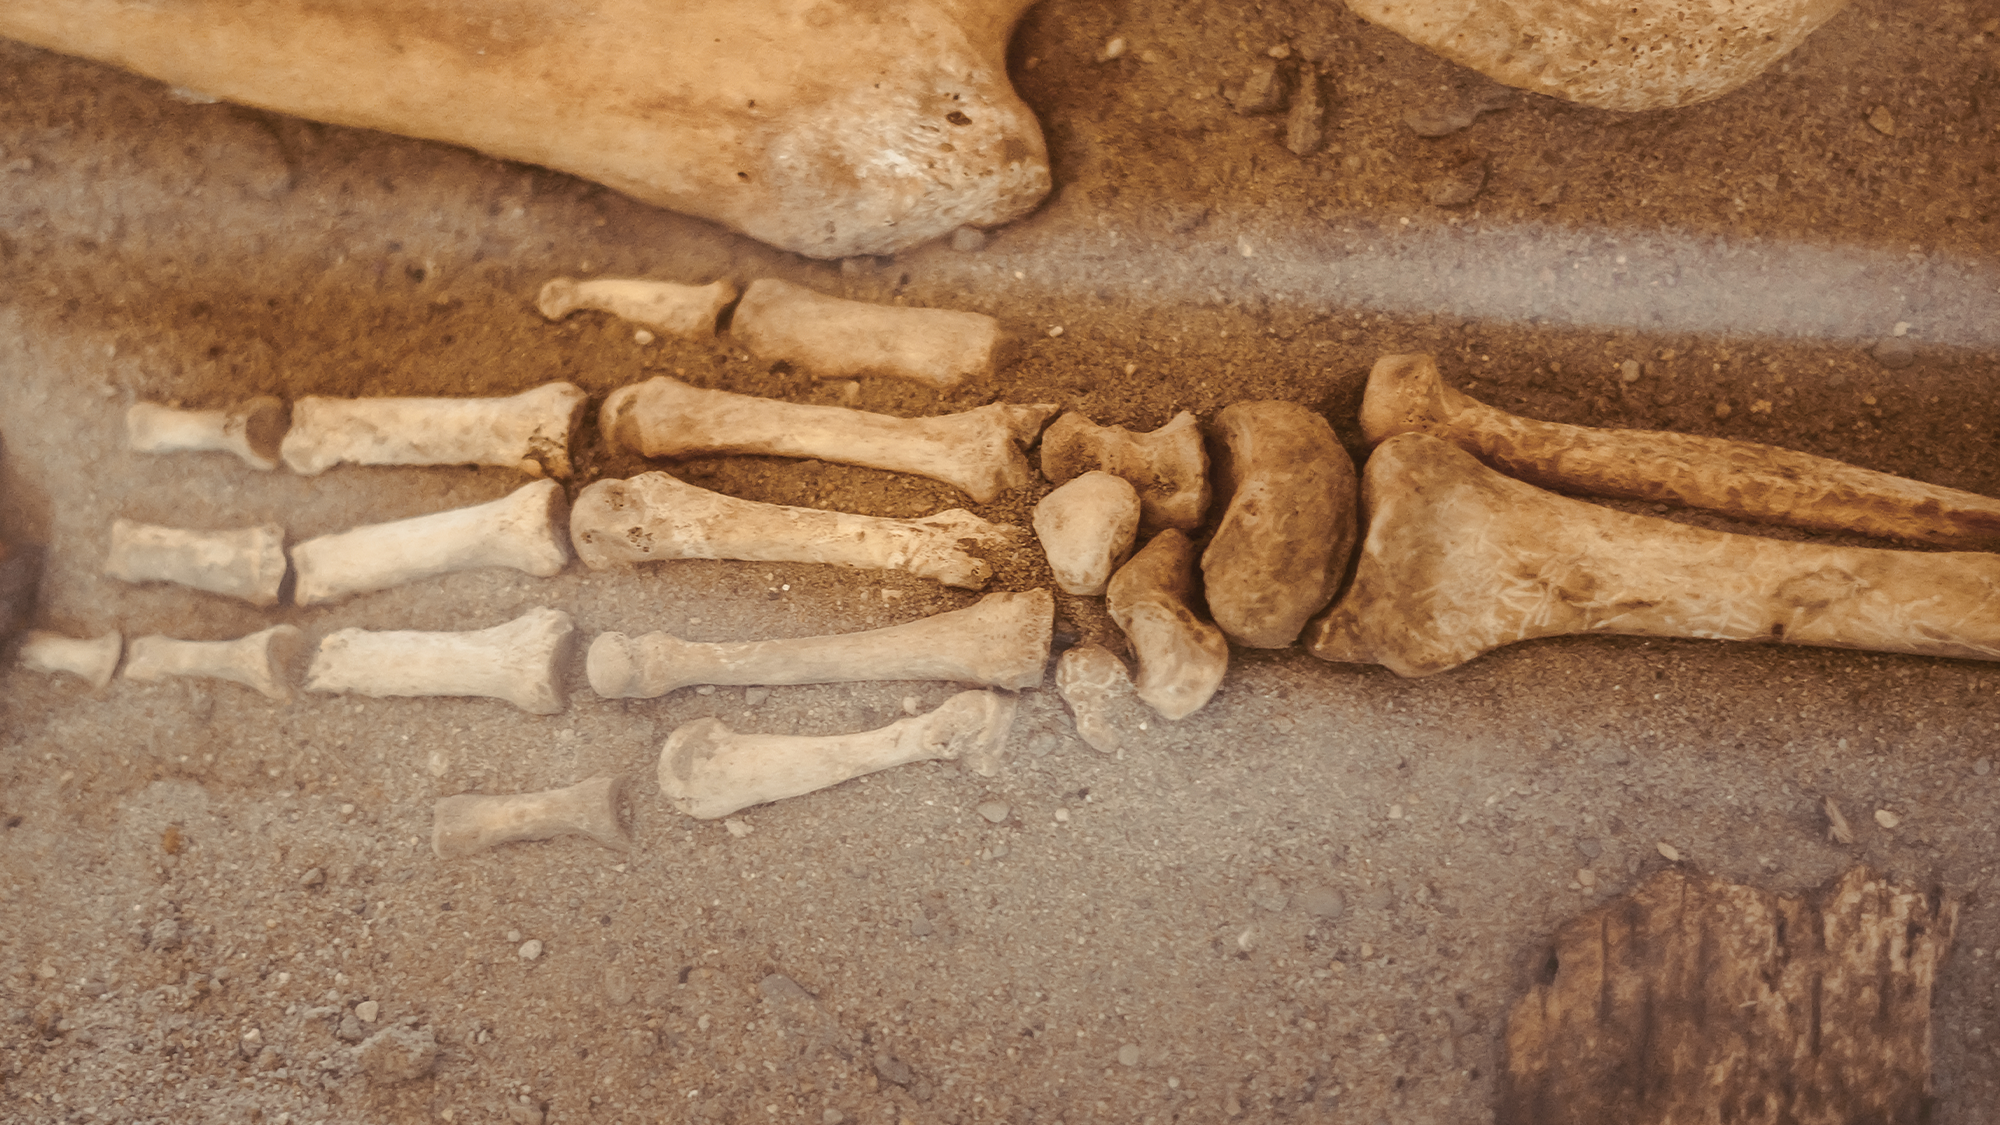 Human hand bones during an archaeological dig.